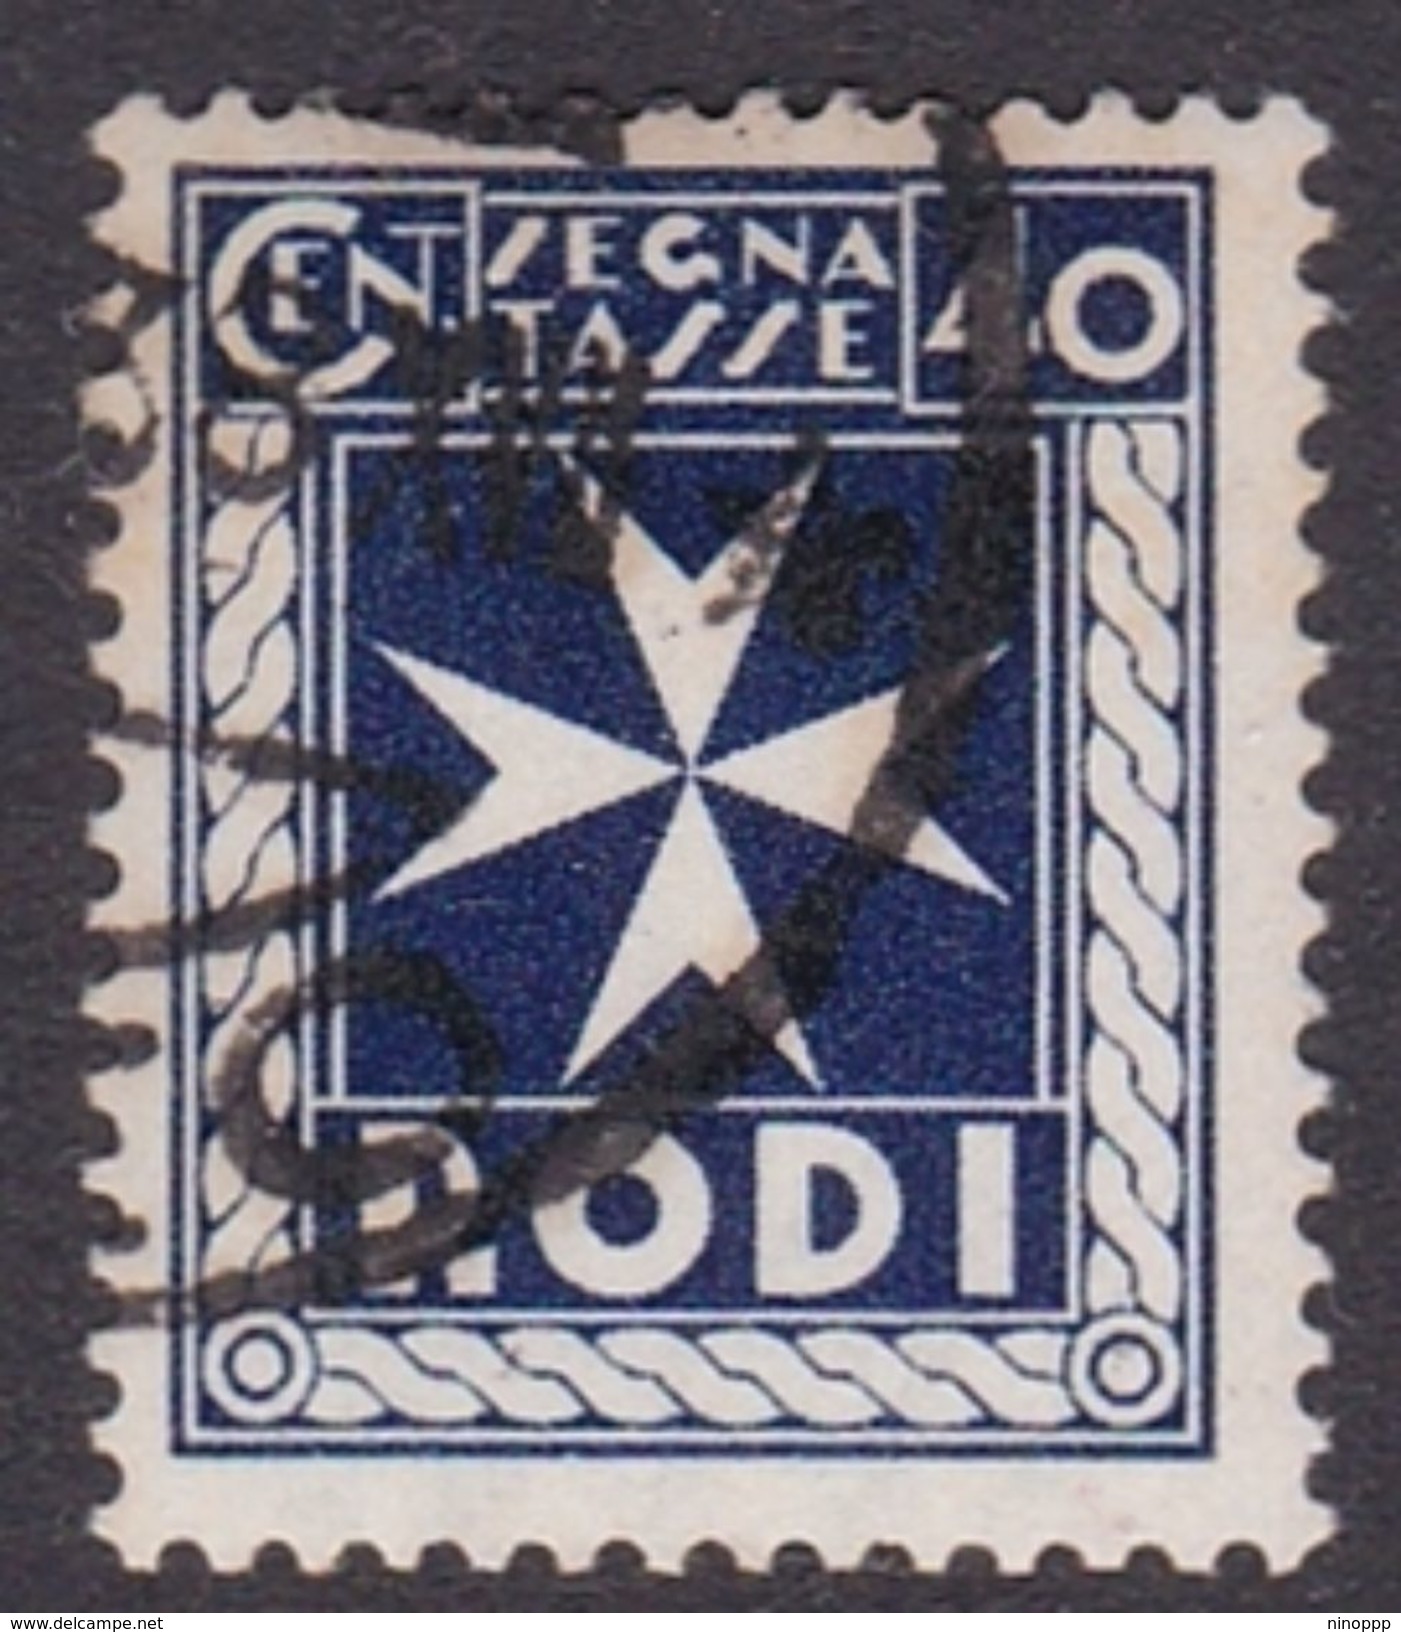 Italy-Colonies And Territories-Aegean General Issue-Rodi Postage Due D4 1934 30c Violet Used - Emisiones Generales